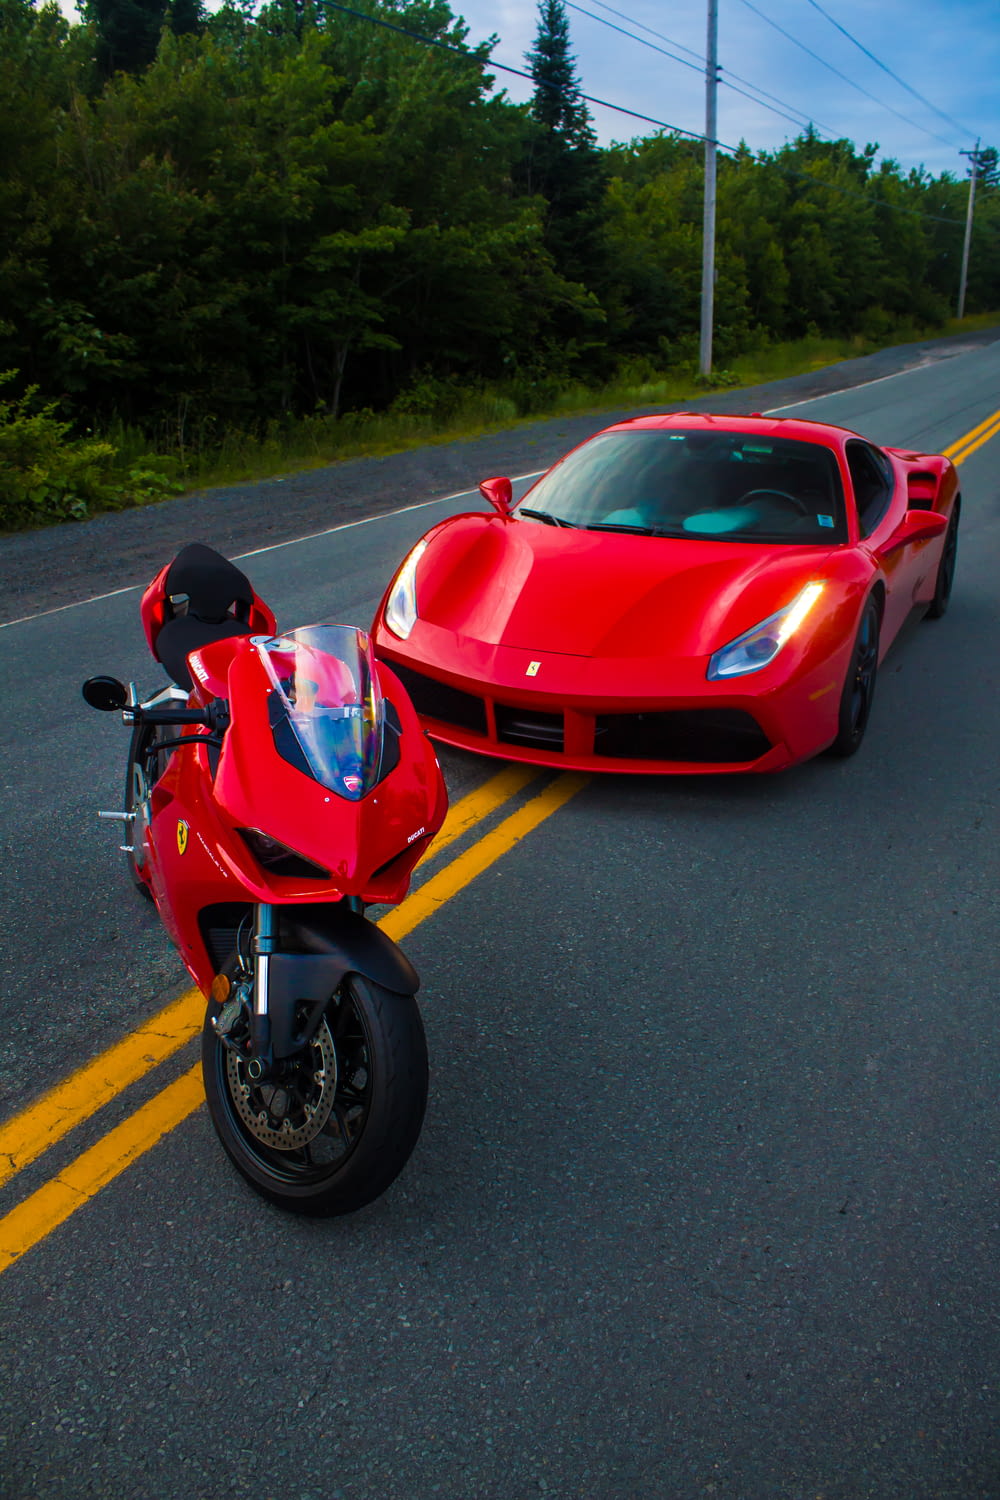 a red sports car and a red motorcycle on a road